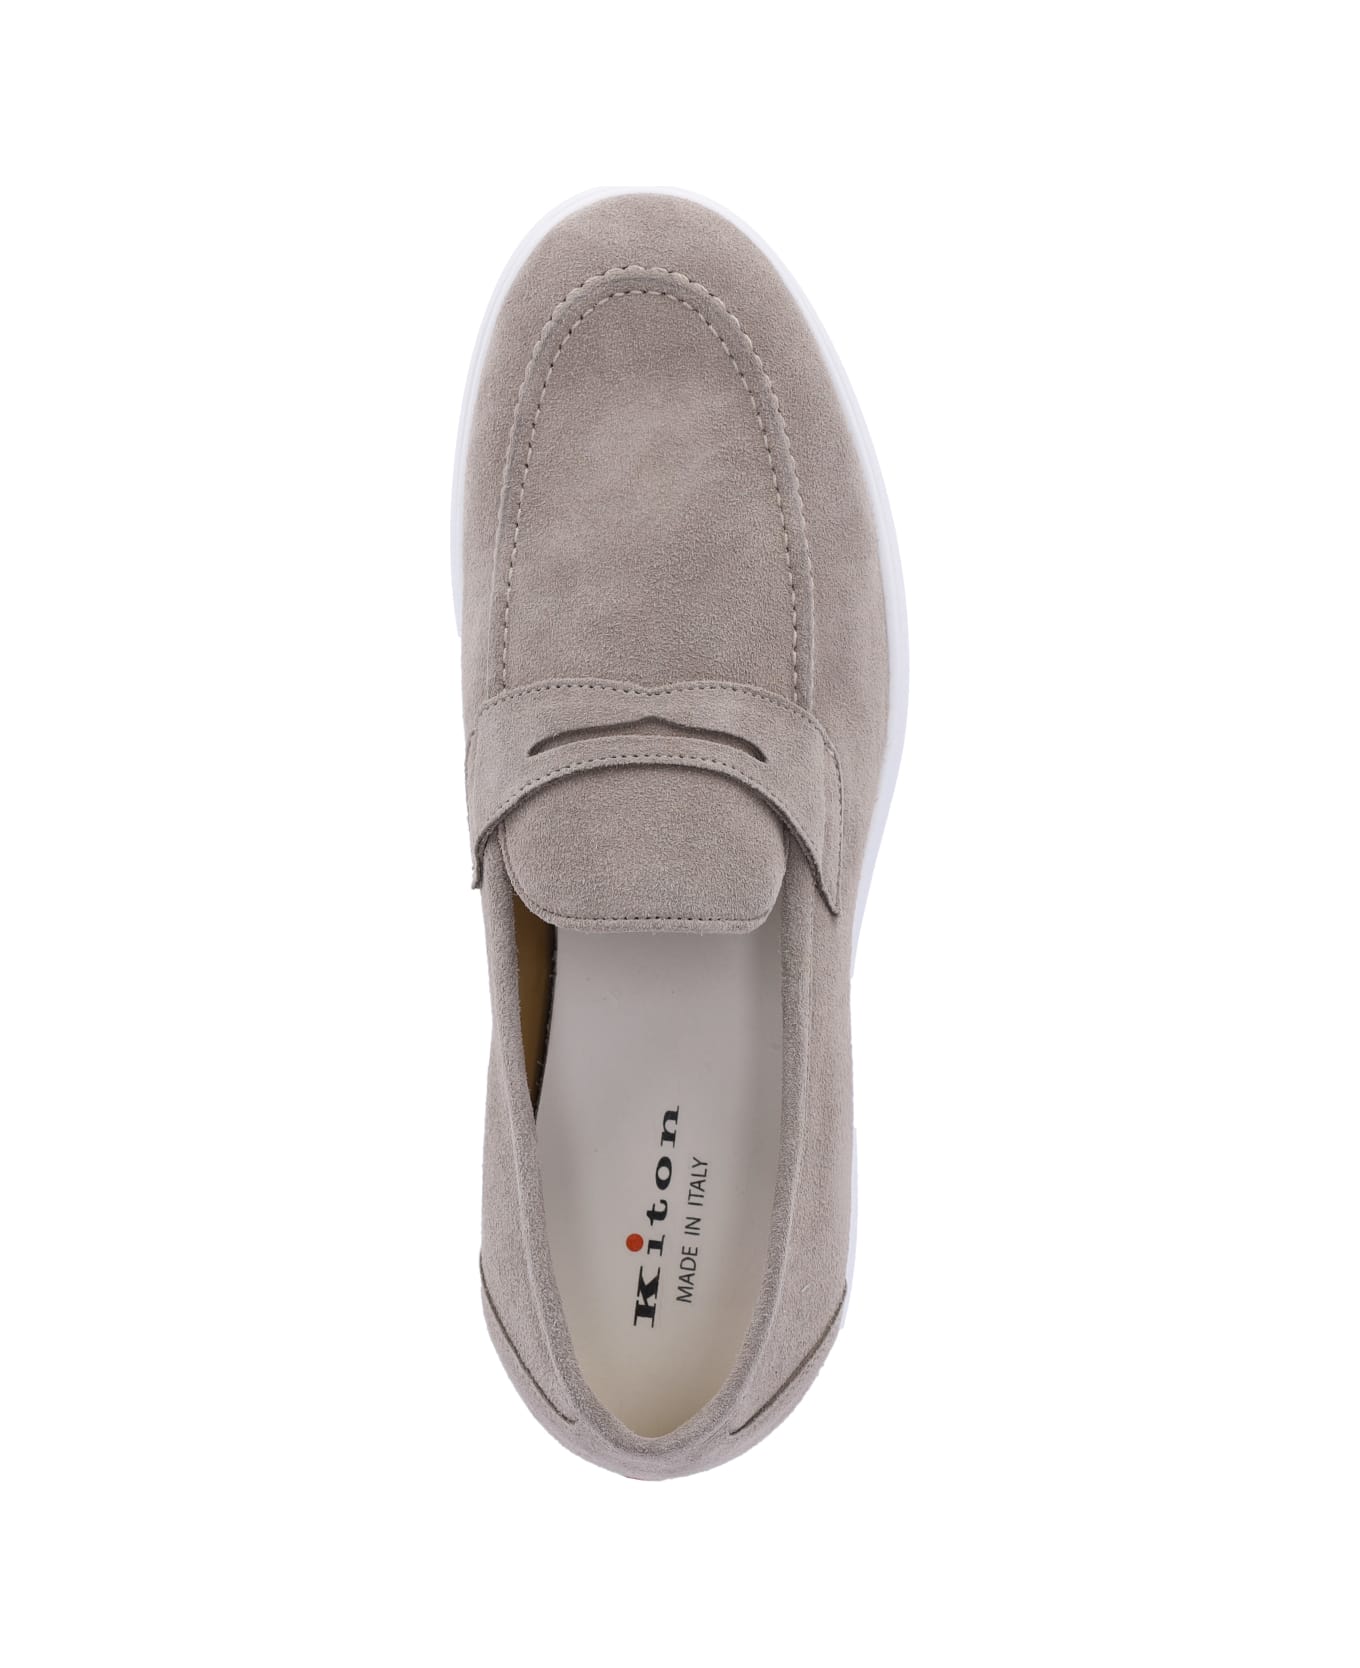 Kiton Suede Loafers - Taupe ローファー＆デッキシューズ